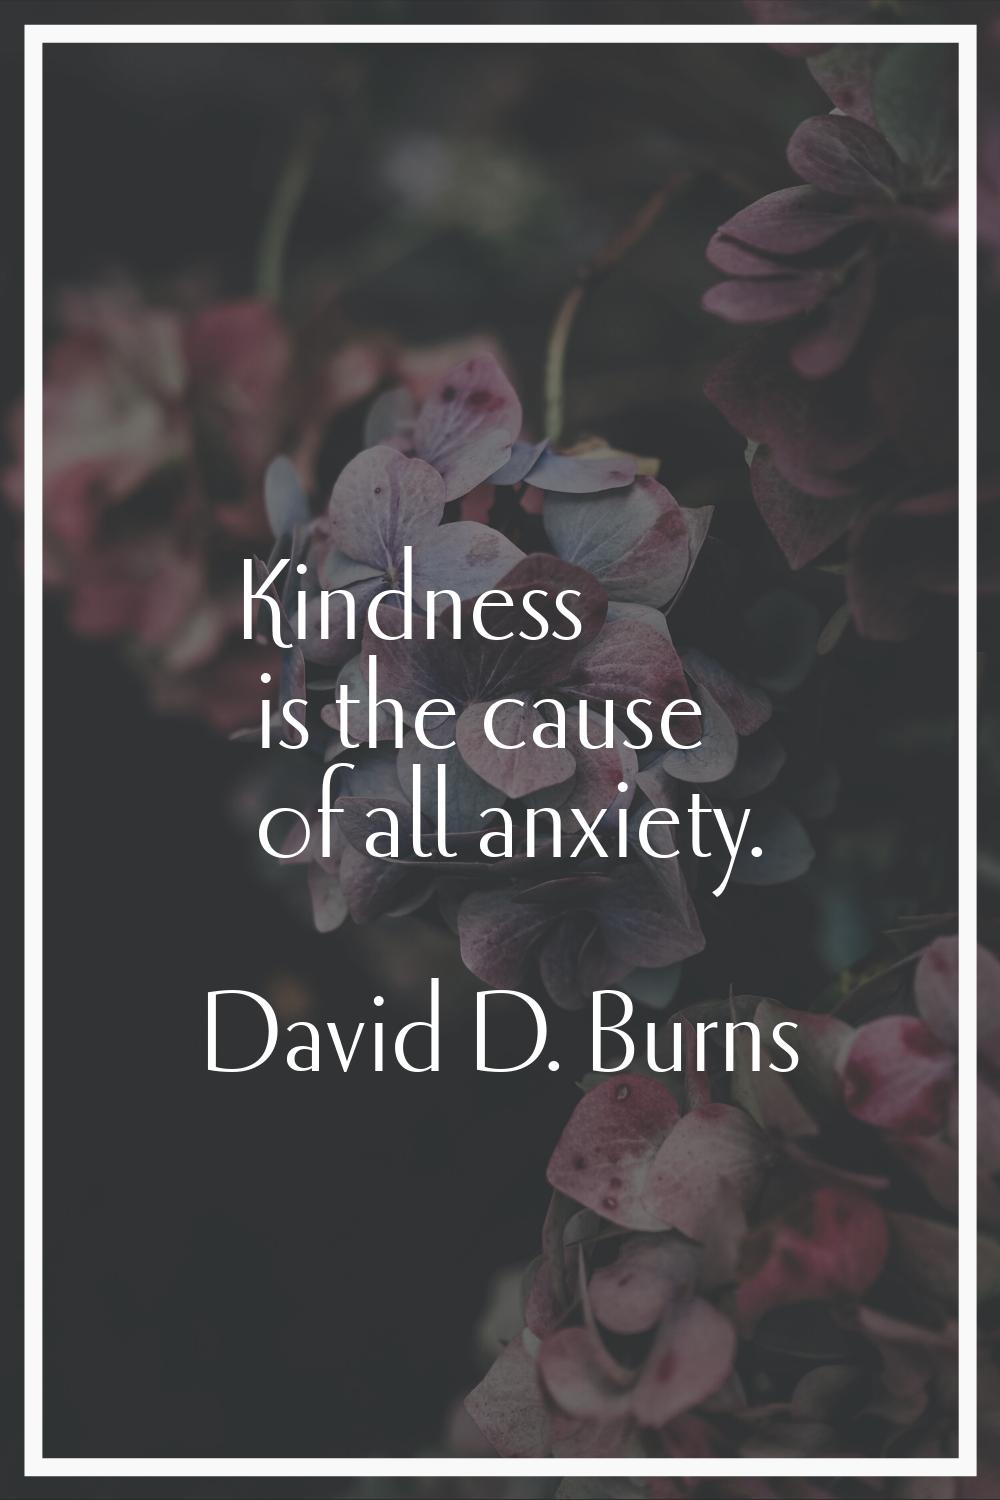 Kindness is the cause of all anxiety.